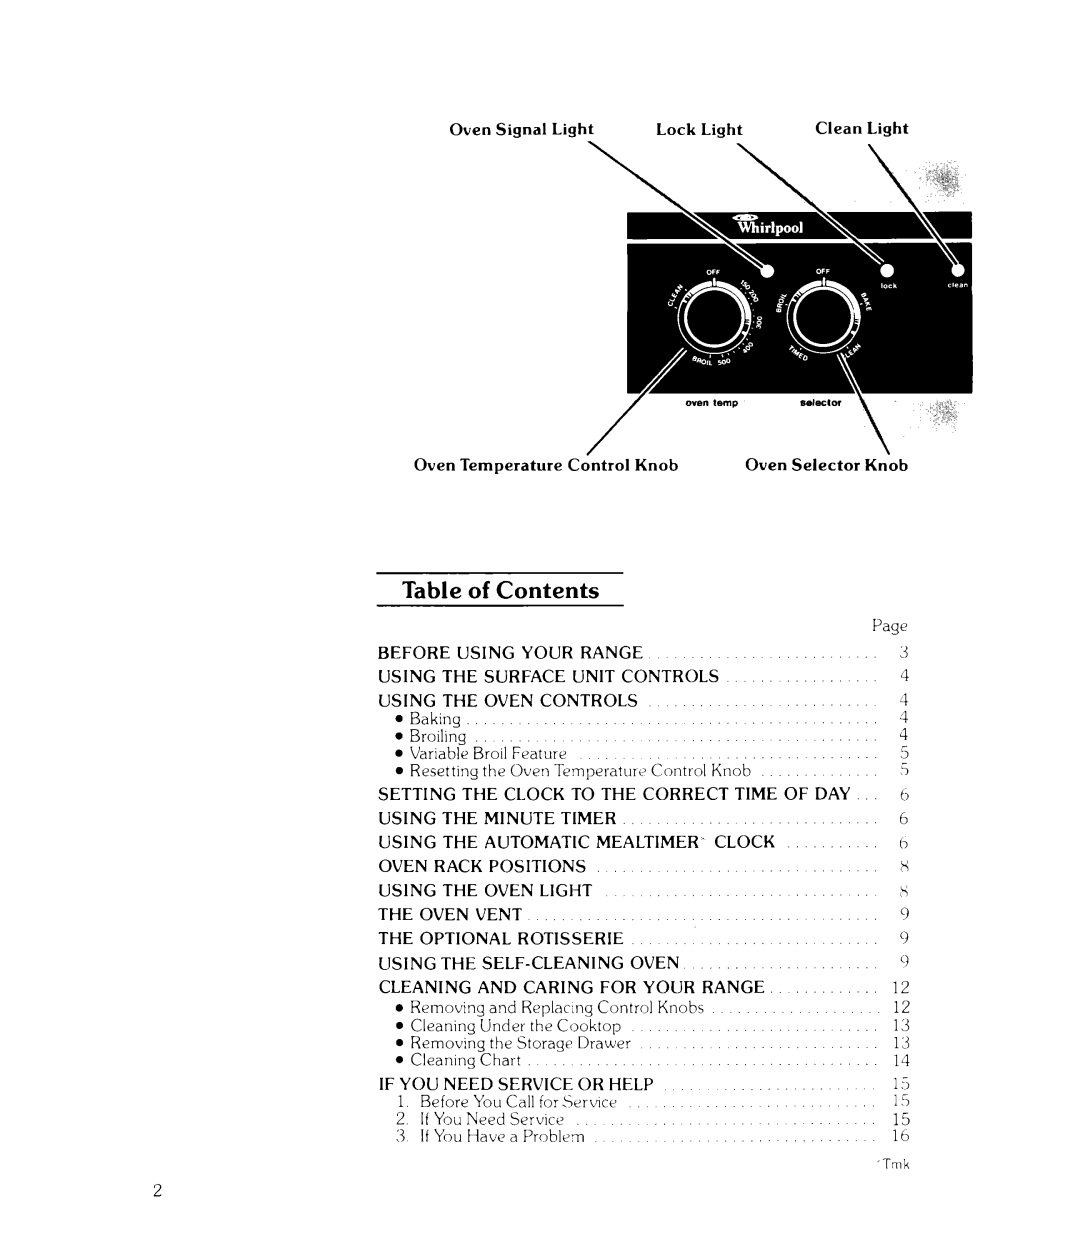 Whirlpool RJE-362B manual Table of Contents 